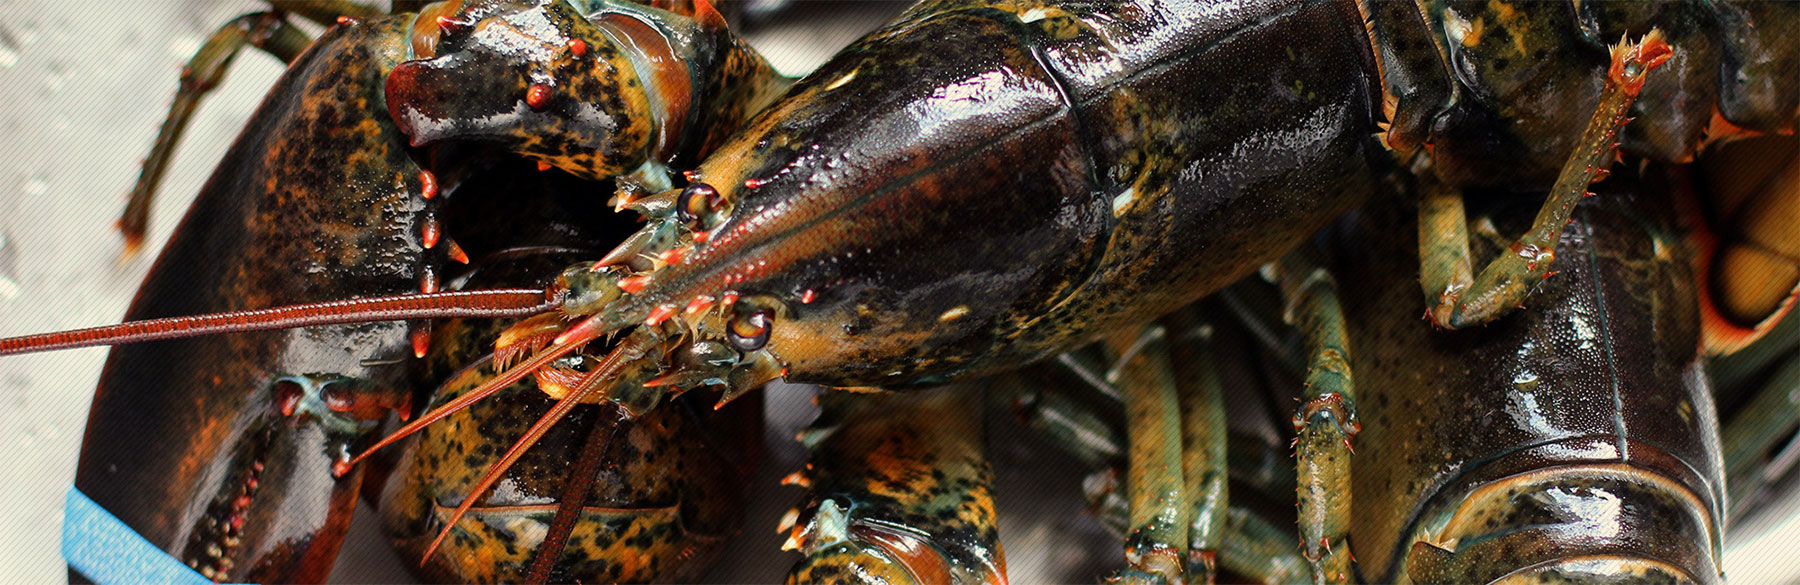 Buy Maine Live Lobsters Online. Fresh Lobster Meat Delivery | The Fresh